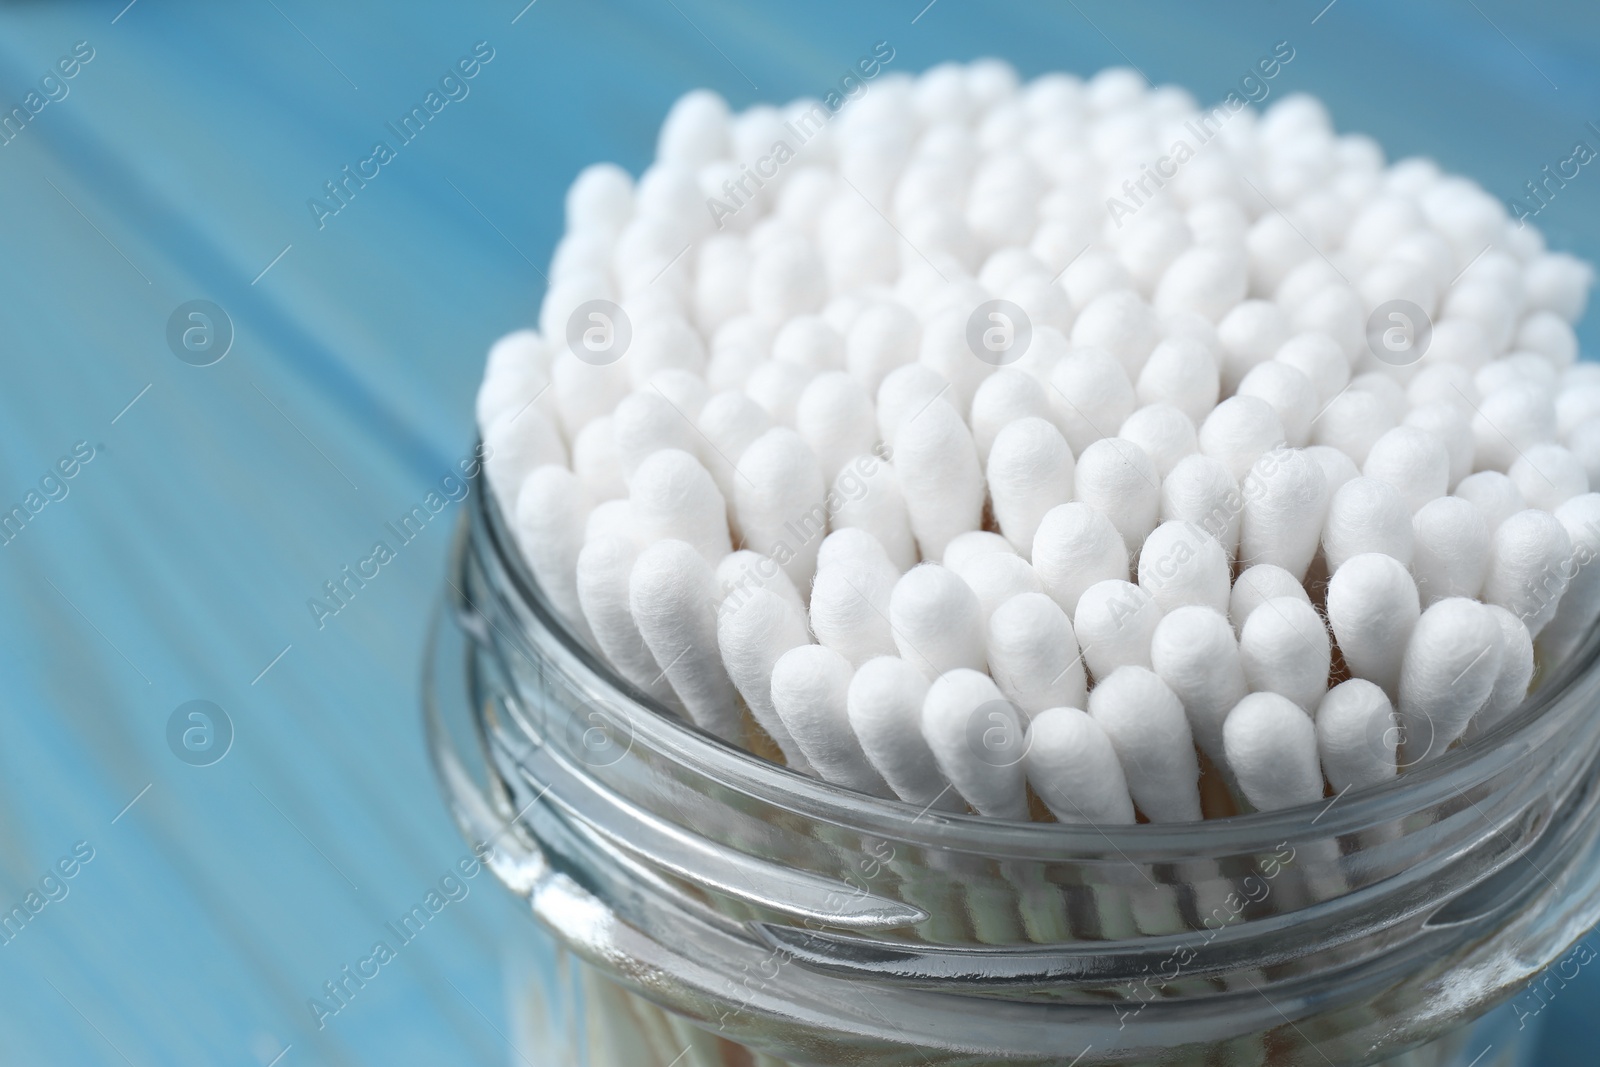 Photo of Many cotton buds in glass jar on light blue background, closeup